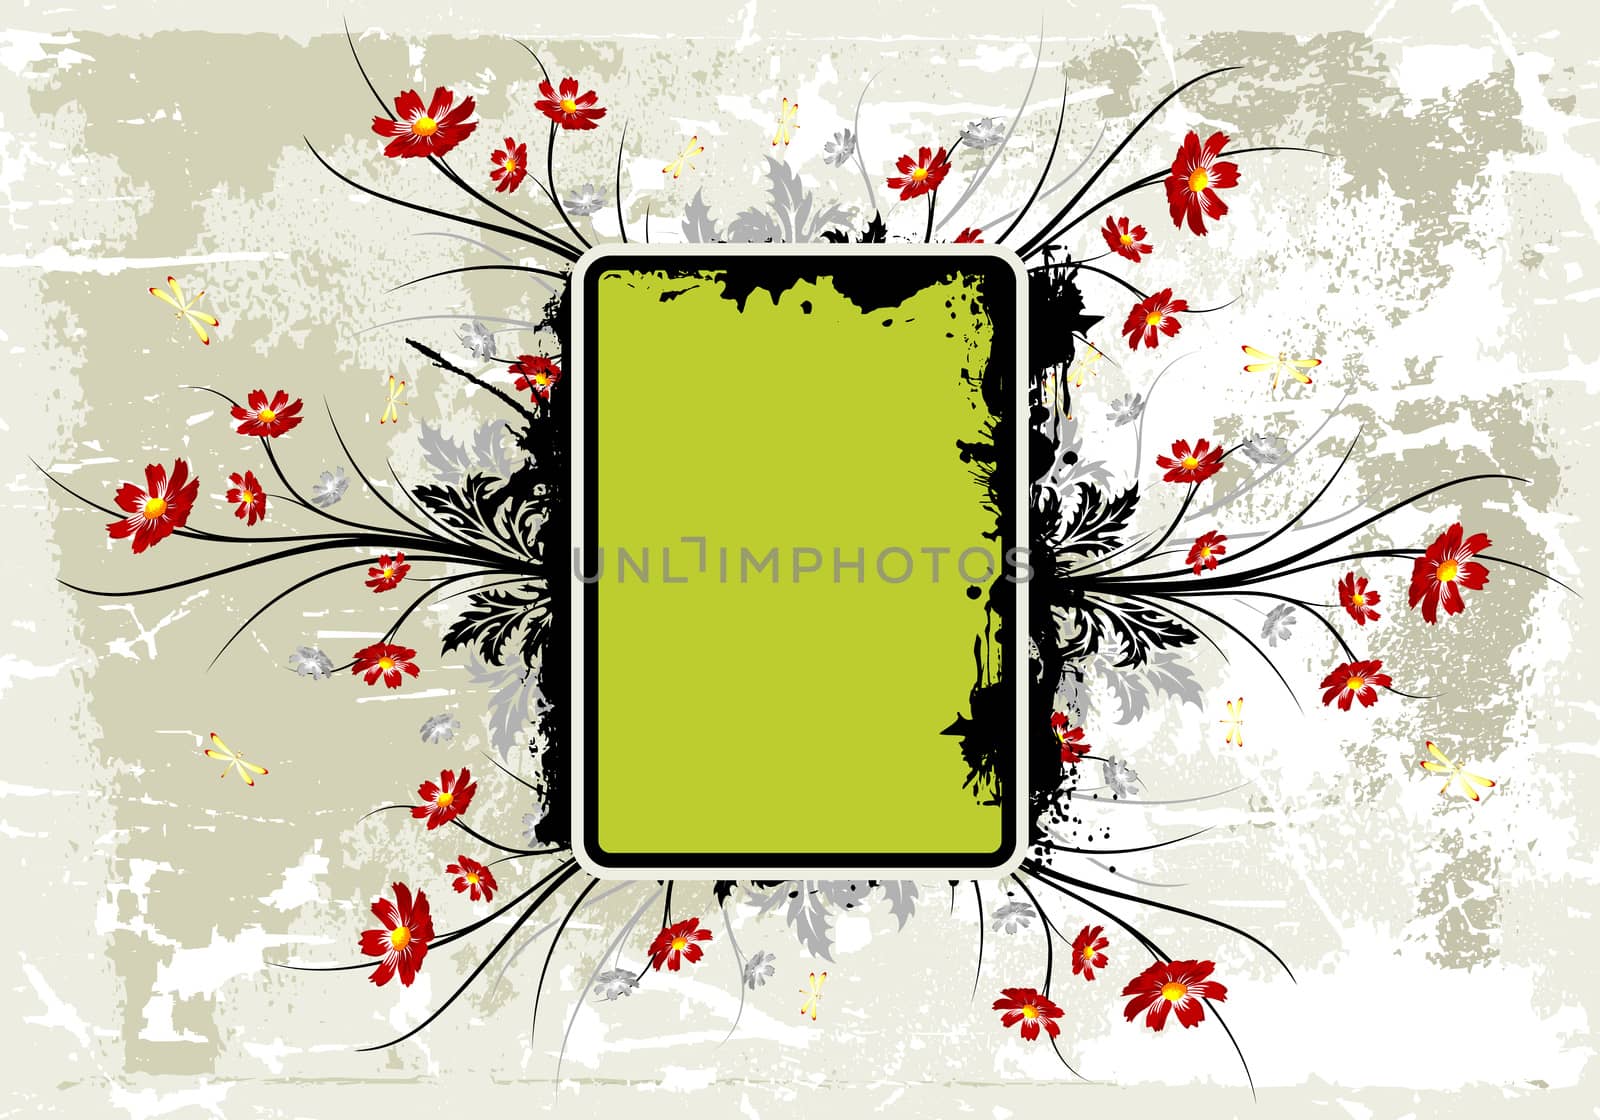 Abstract grunge painted background with flowers vector illustration